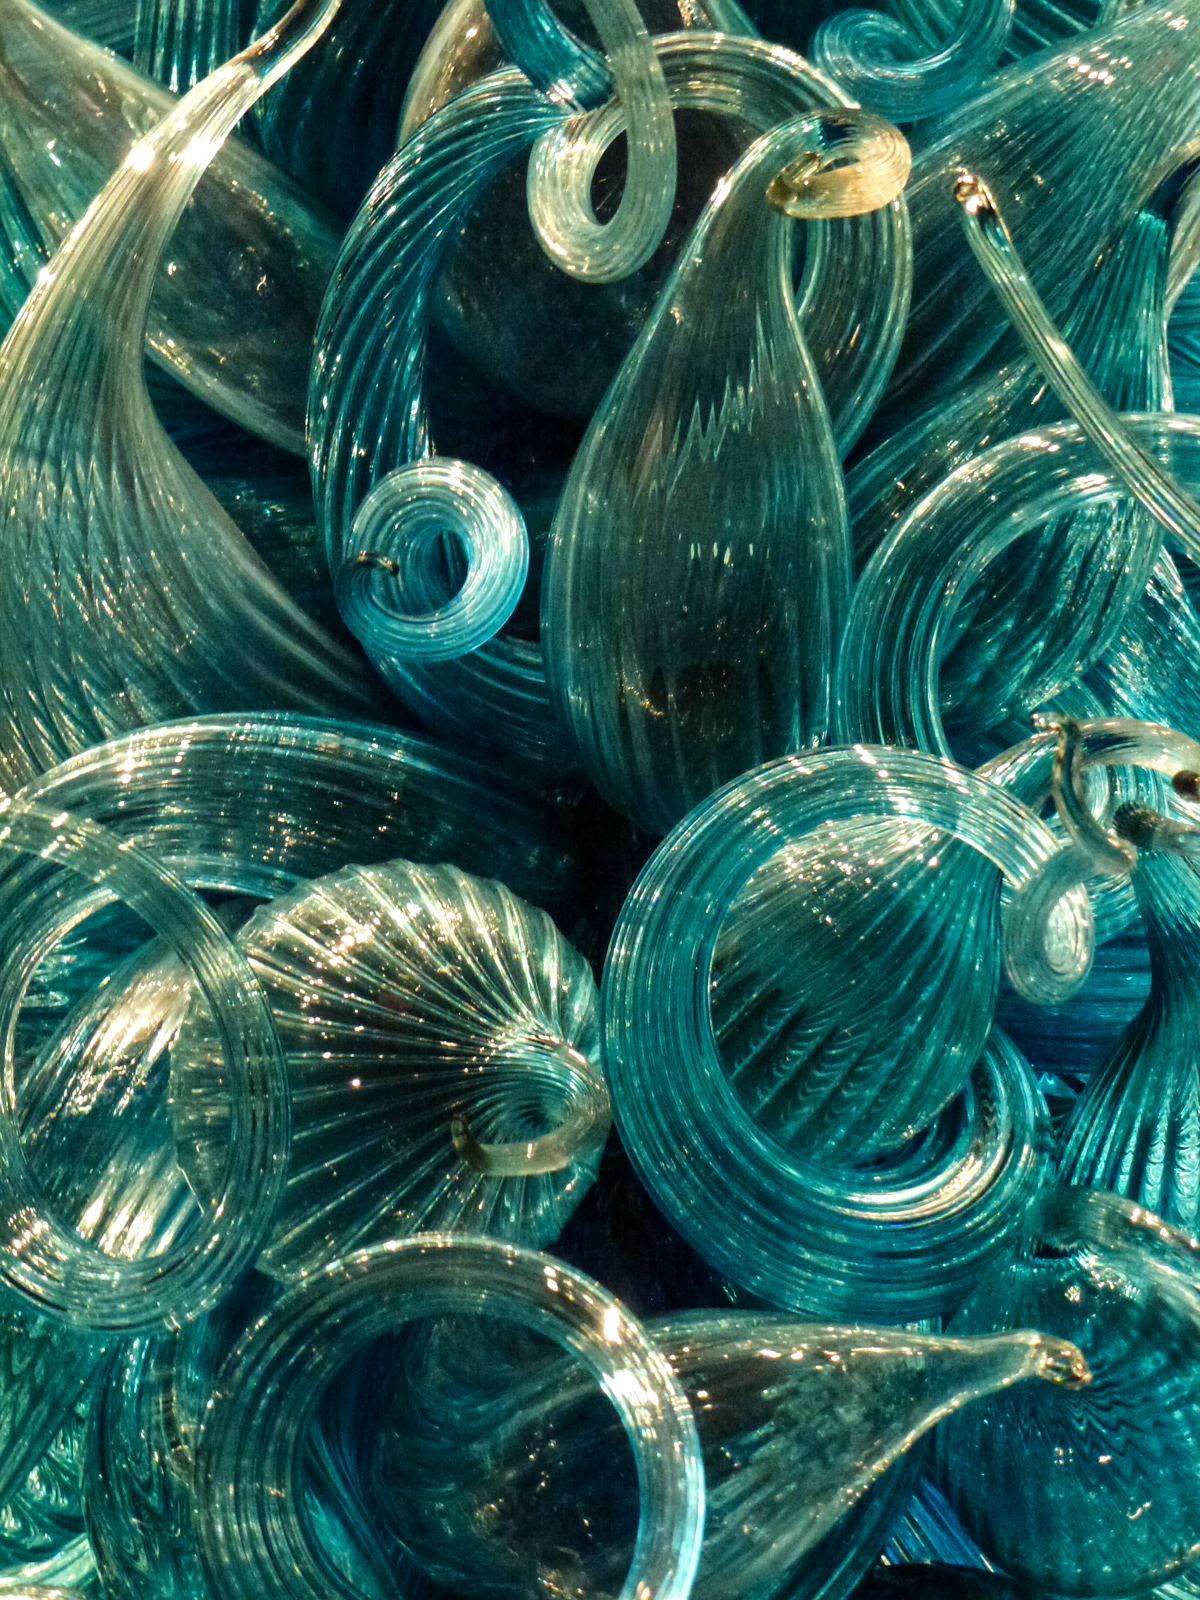 Chihuly Garden and Glass 7